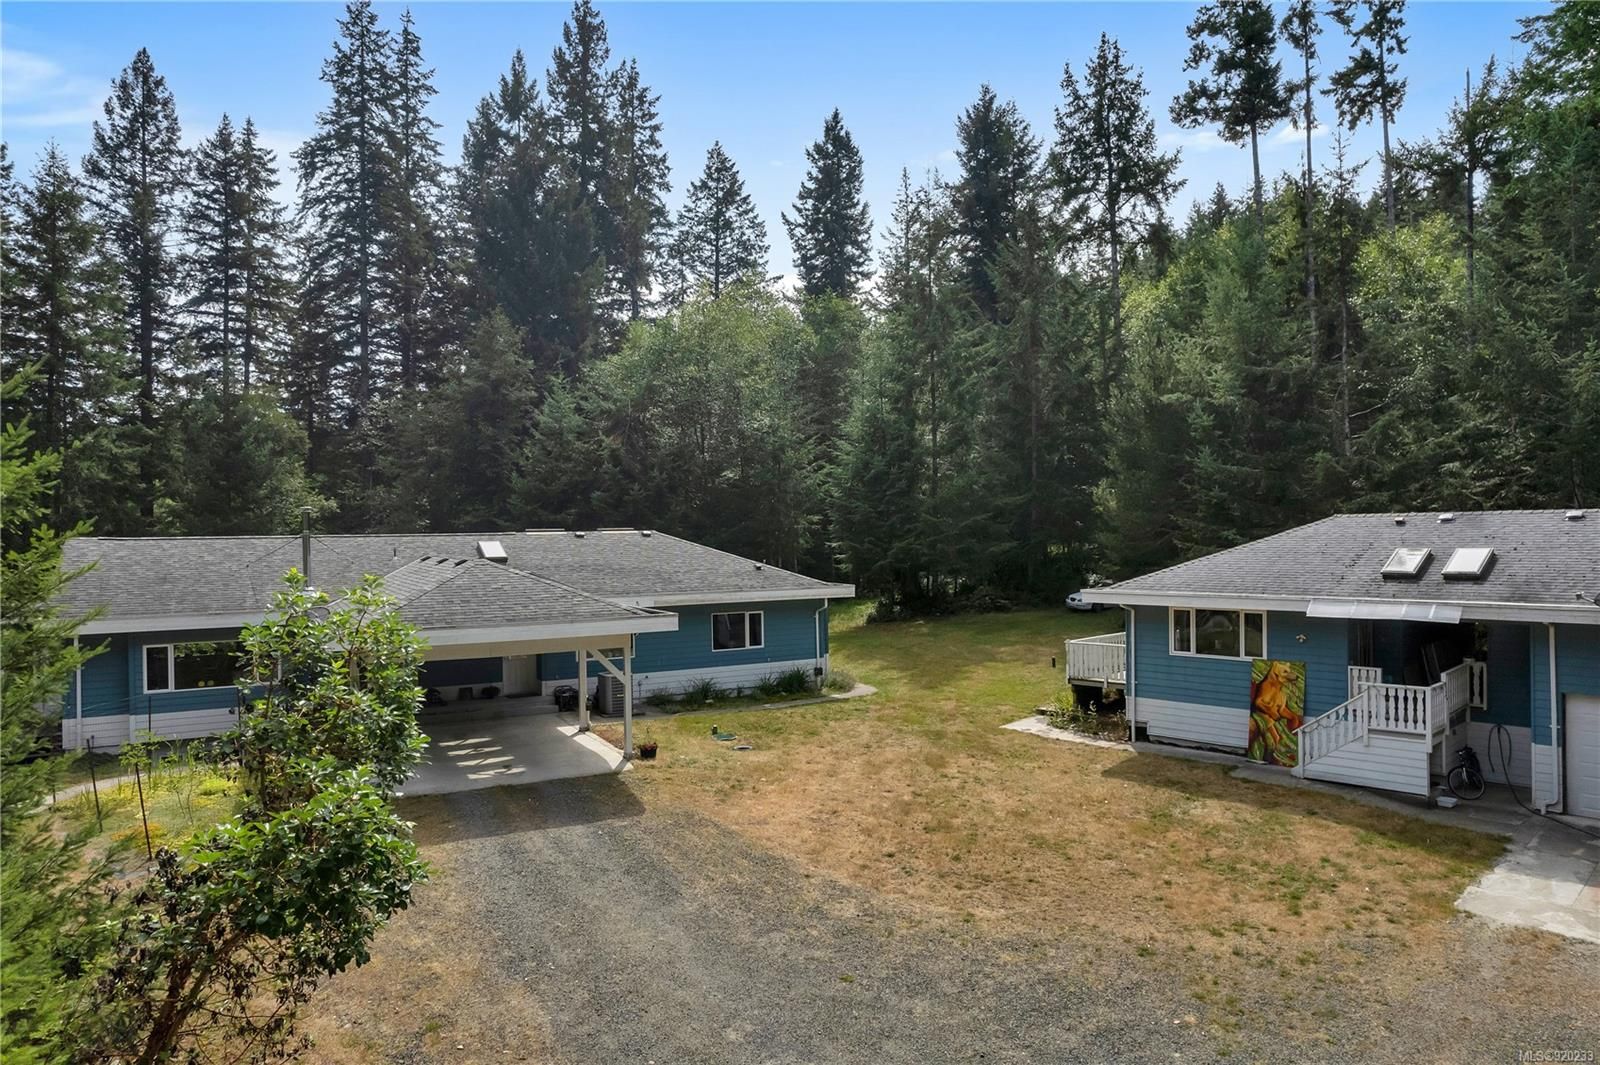 Quadra Island home & garage/suite on 5.66 acres, located in popular residential area just north of Heriot Bay!